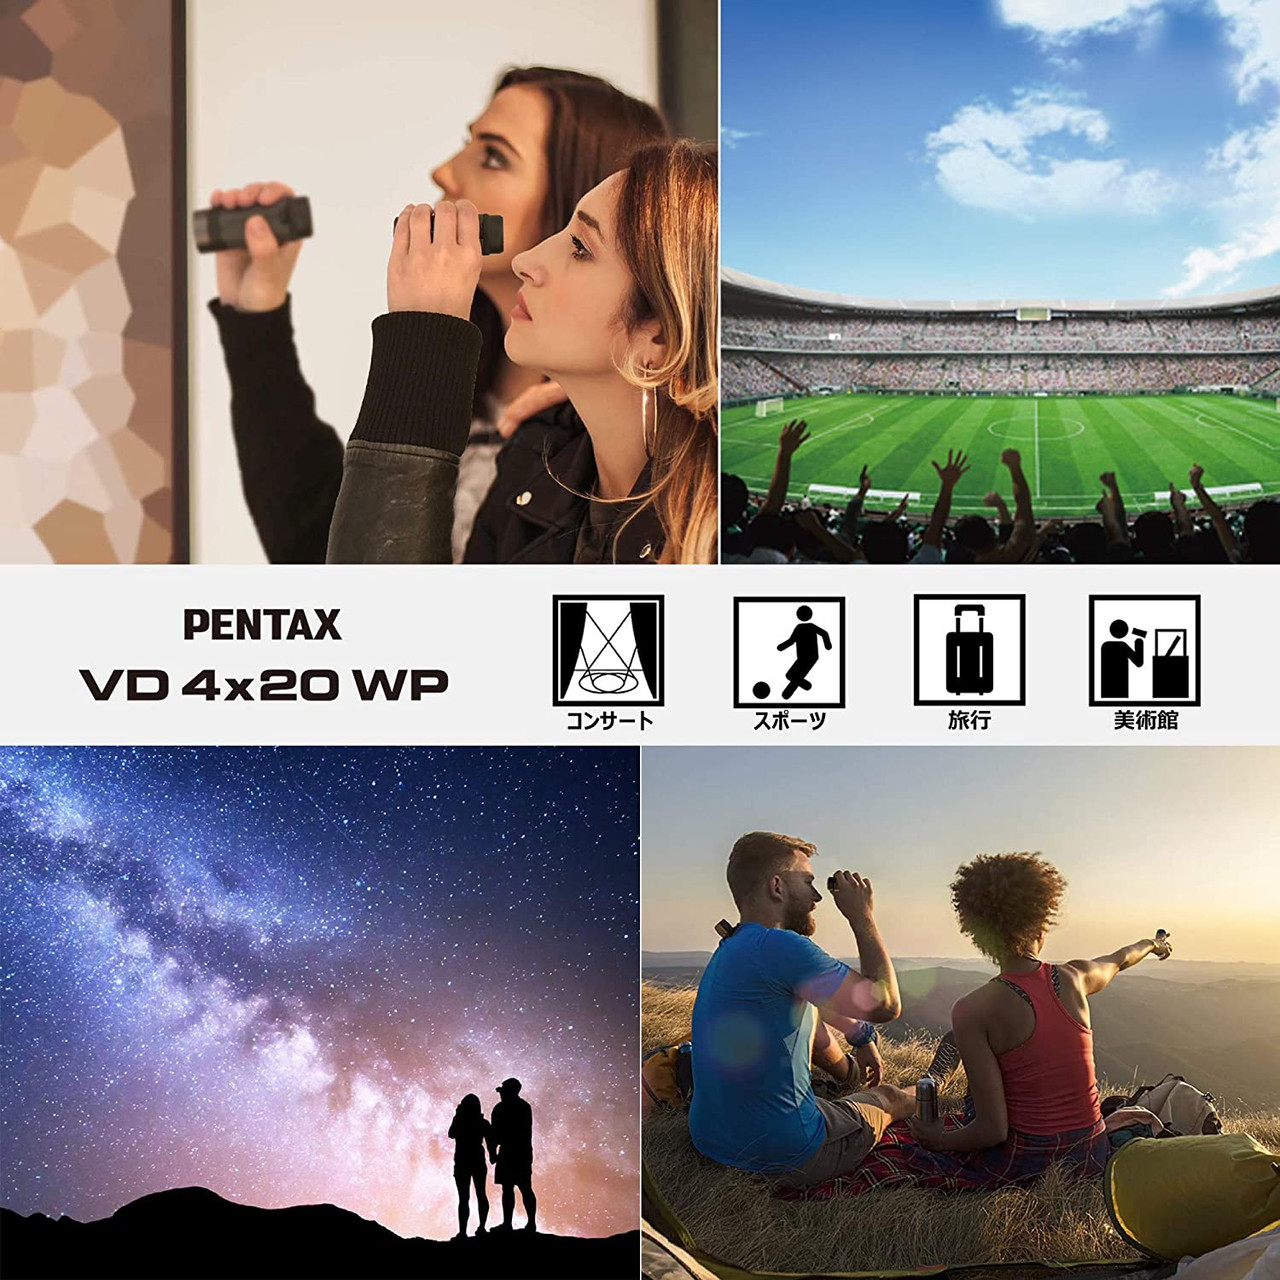 PENTAX VD 4x20 WP World's First Separable Binoculars: 3 in 1 Binoculars (Can also be used as a monocular or 16x telescope) Bright, clear and high optical performance High waterproof 63600